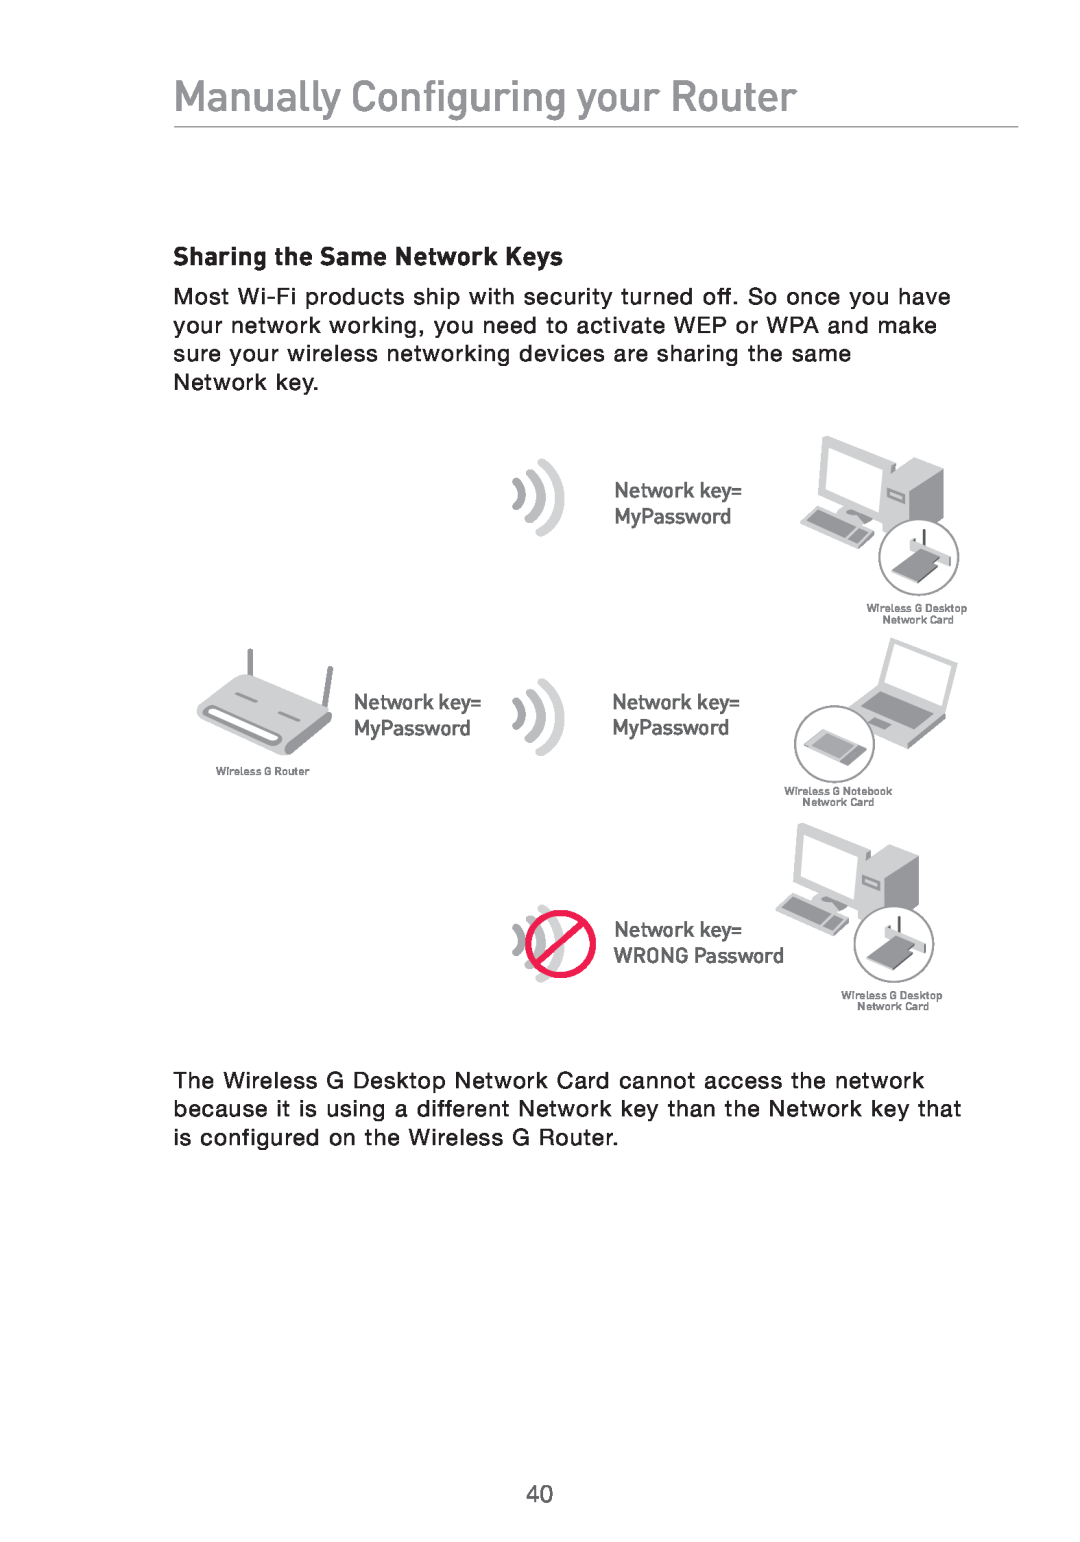 Belkin Pre-N manual Sharing the Same Network Keys, Manually Configuring your Router 